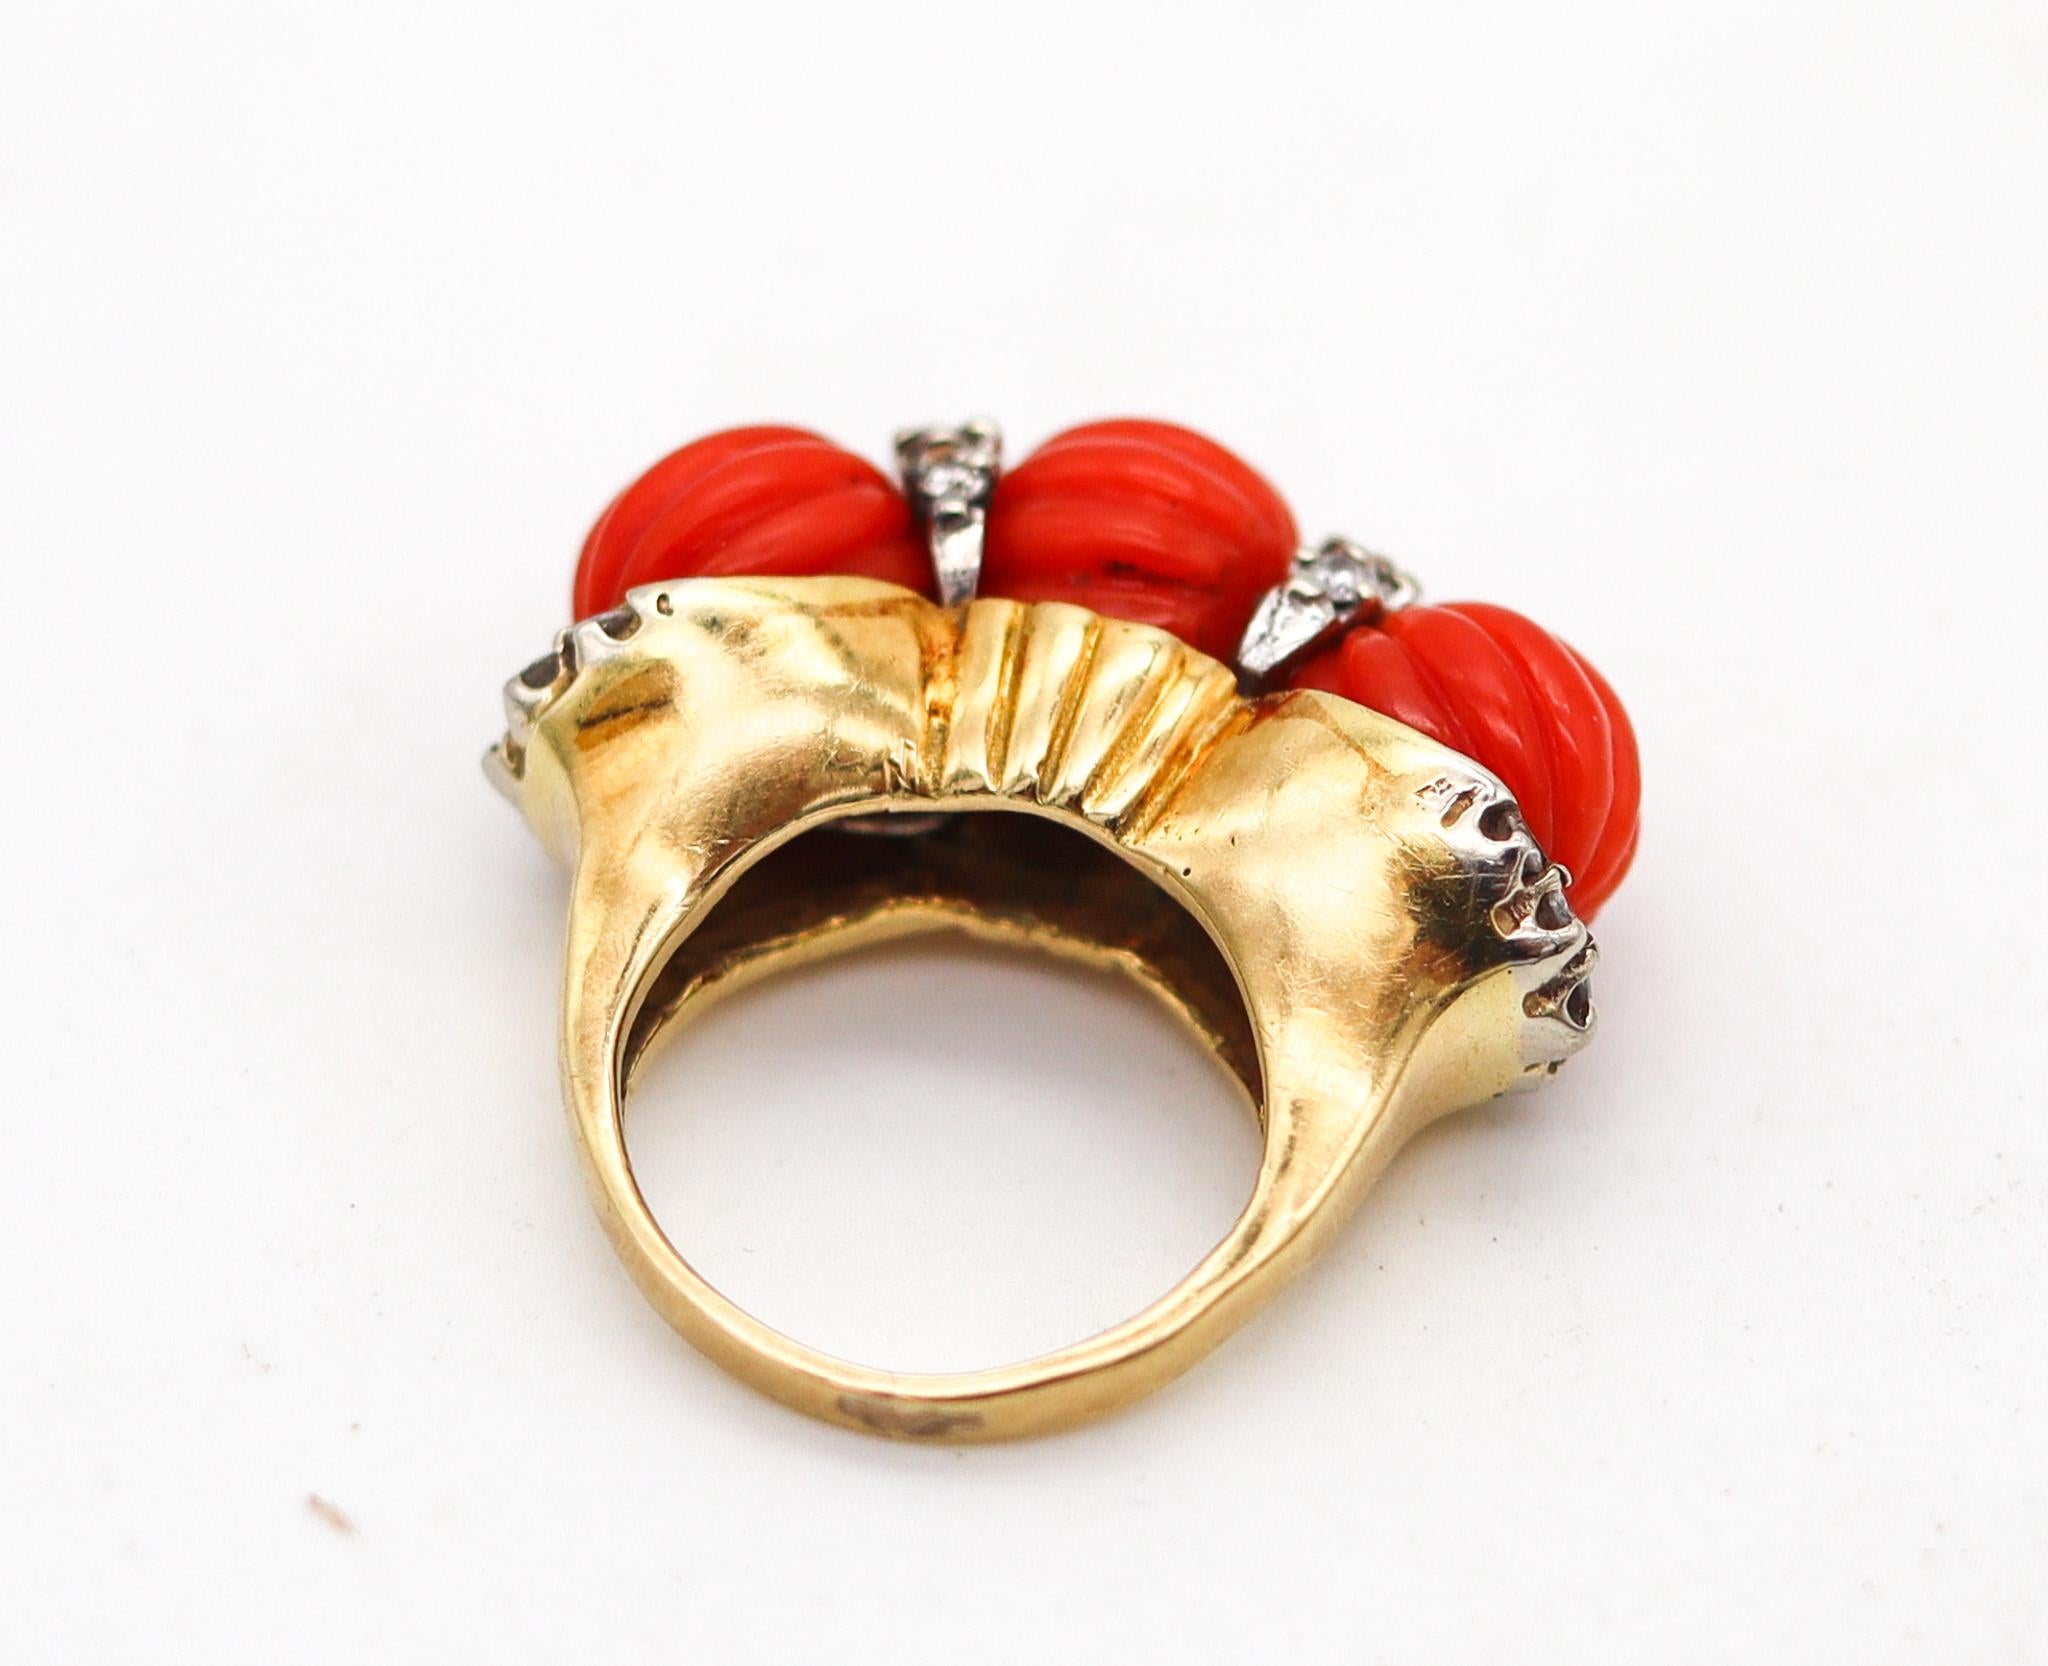 Cabochon Francesco Passaretta 1970 Fluted Sardinian Coral Ring In 18Kt Gold With Diamonds For Sale